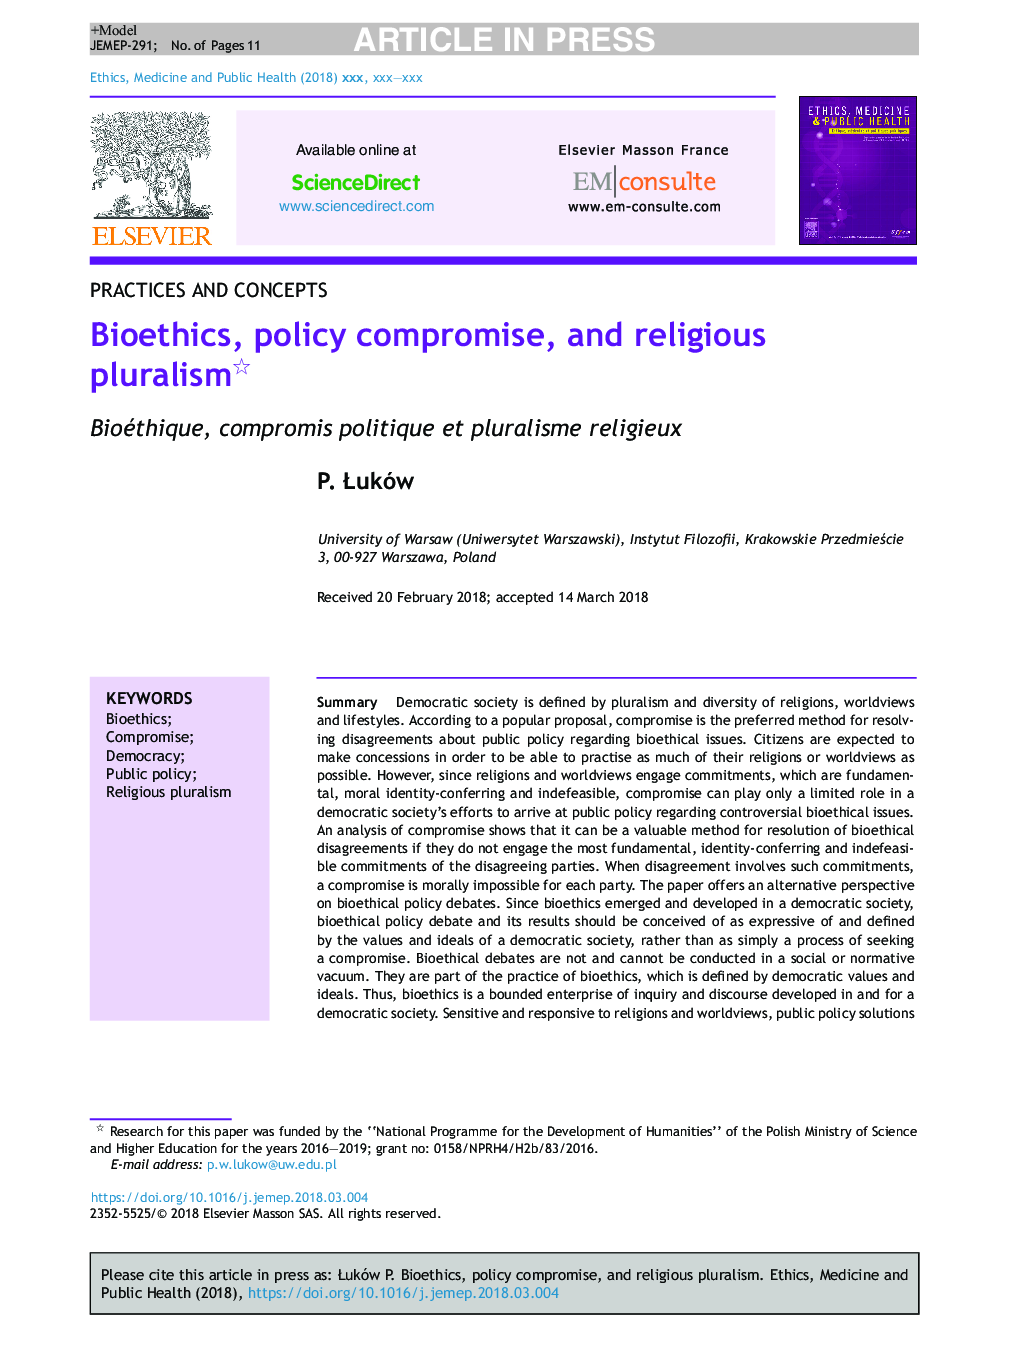 Bioethics, policy compromise, and religious pluralism